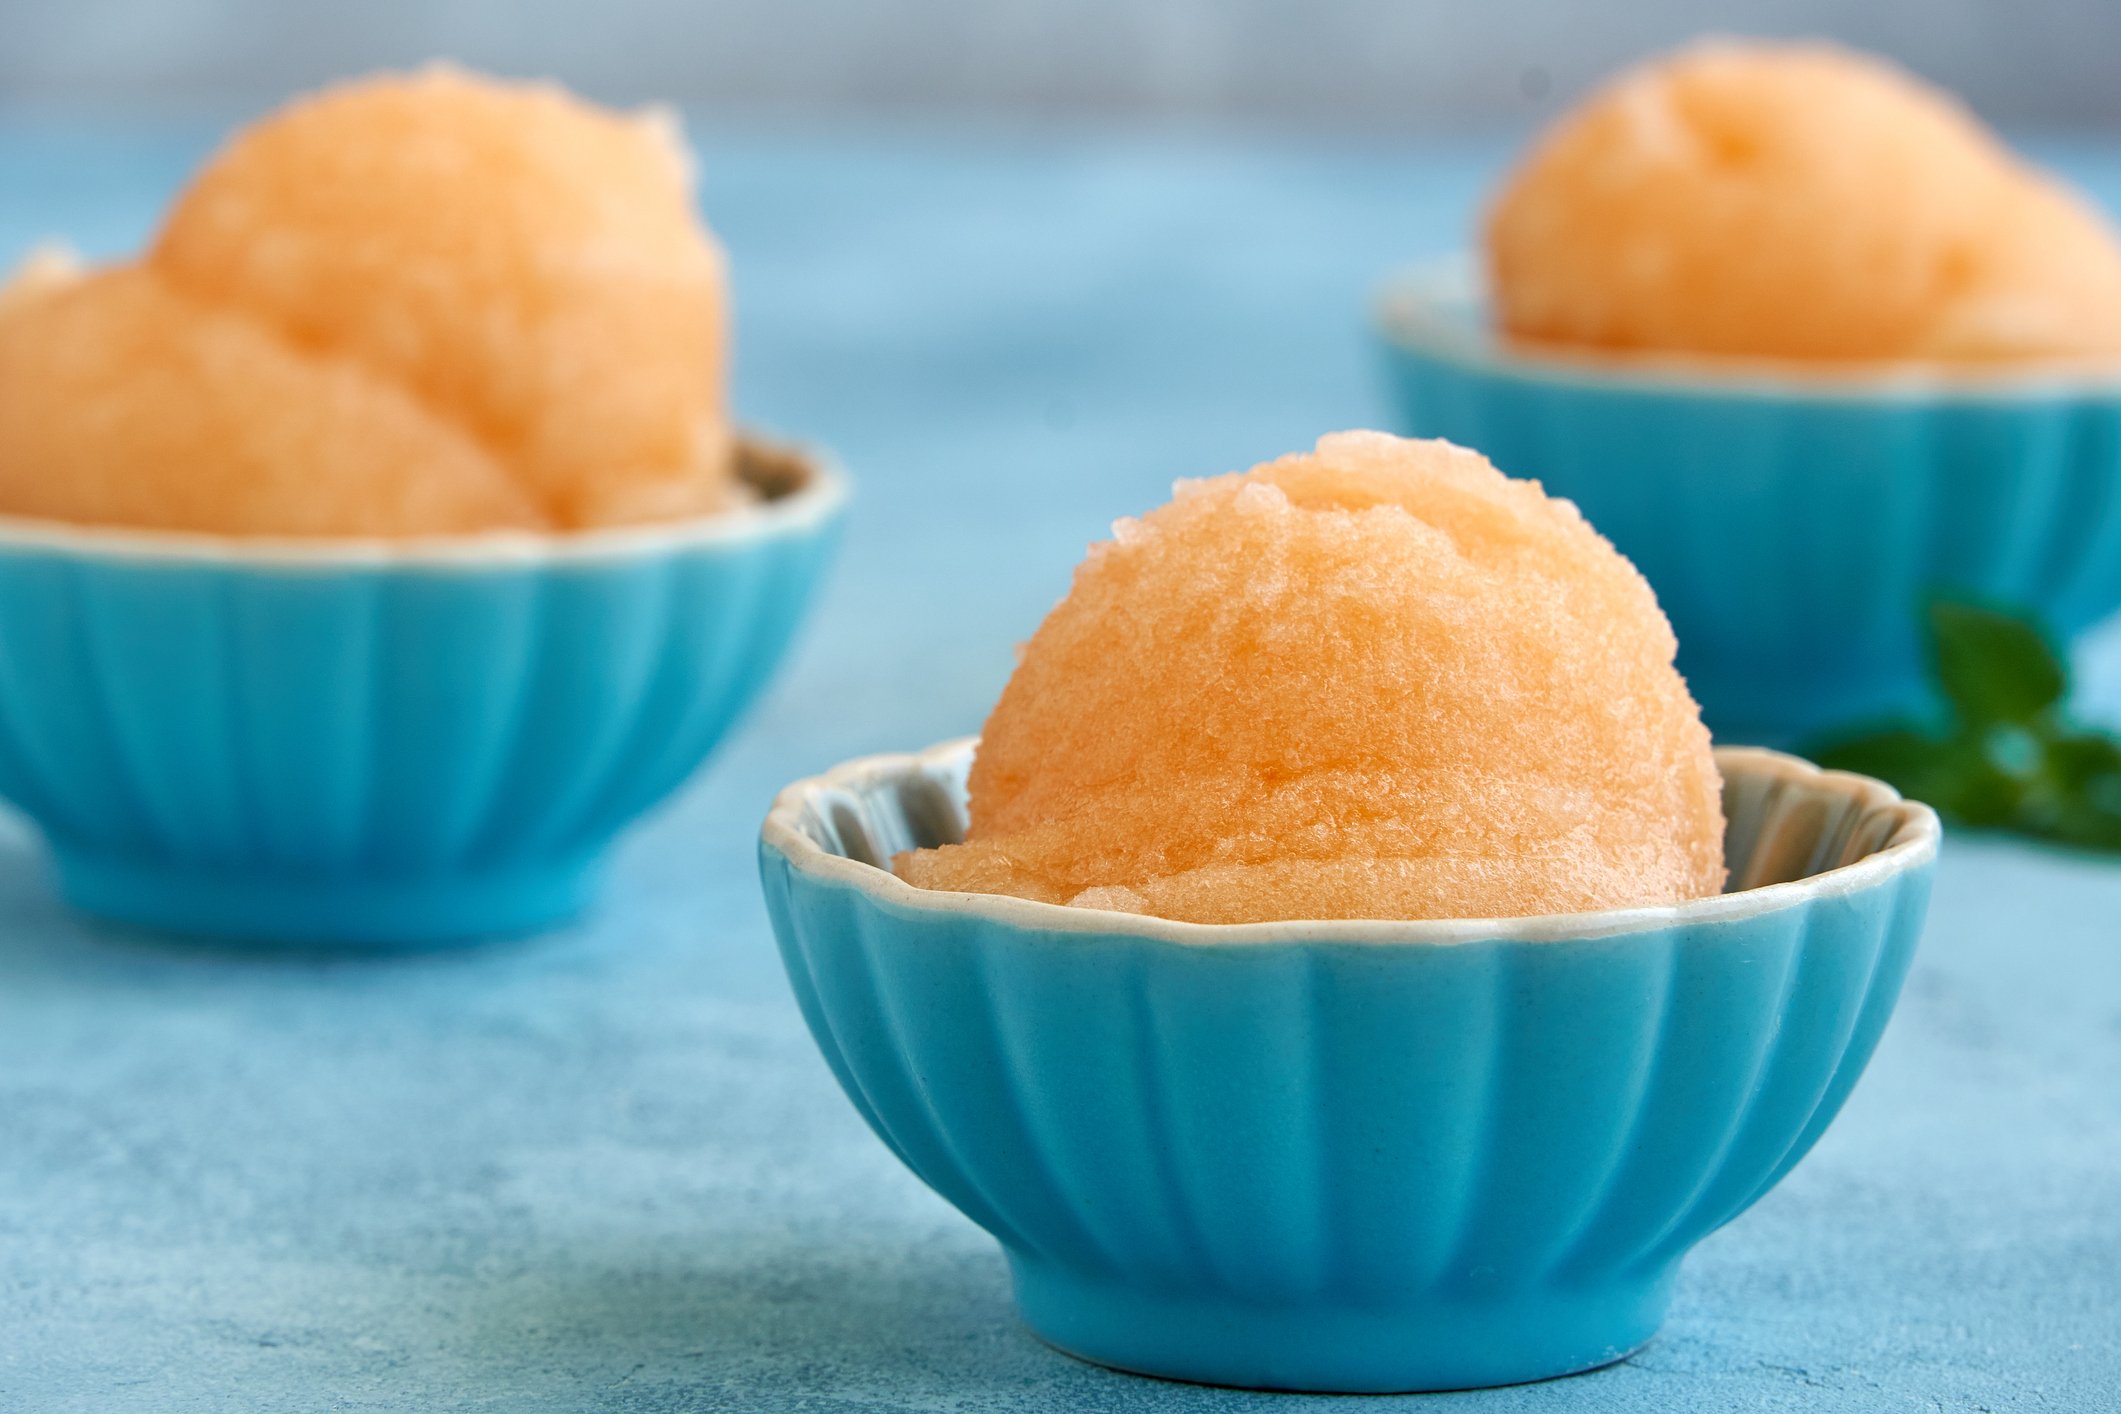 Apricots or peaches are also yummy choices for some homemade sorbet. (iStock Photo)